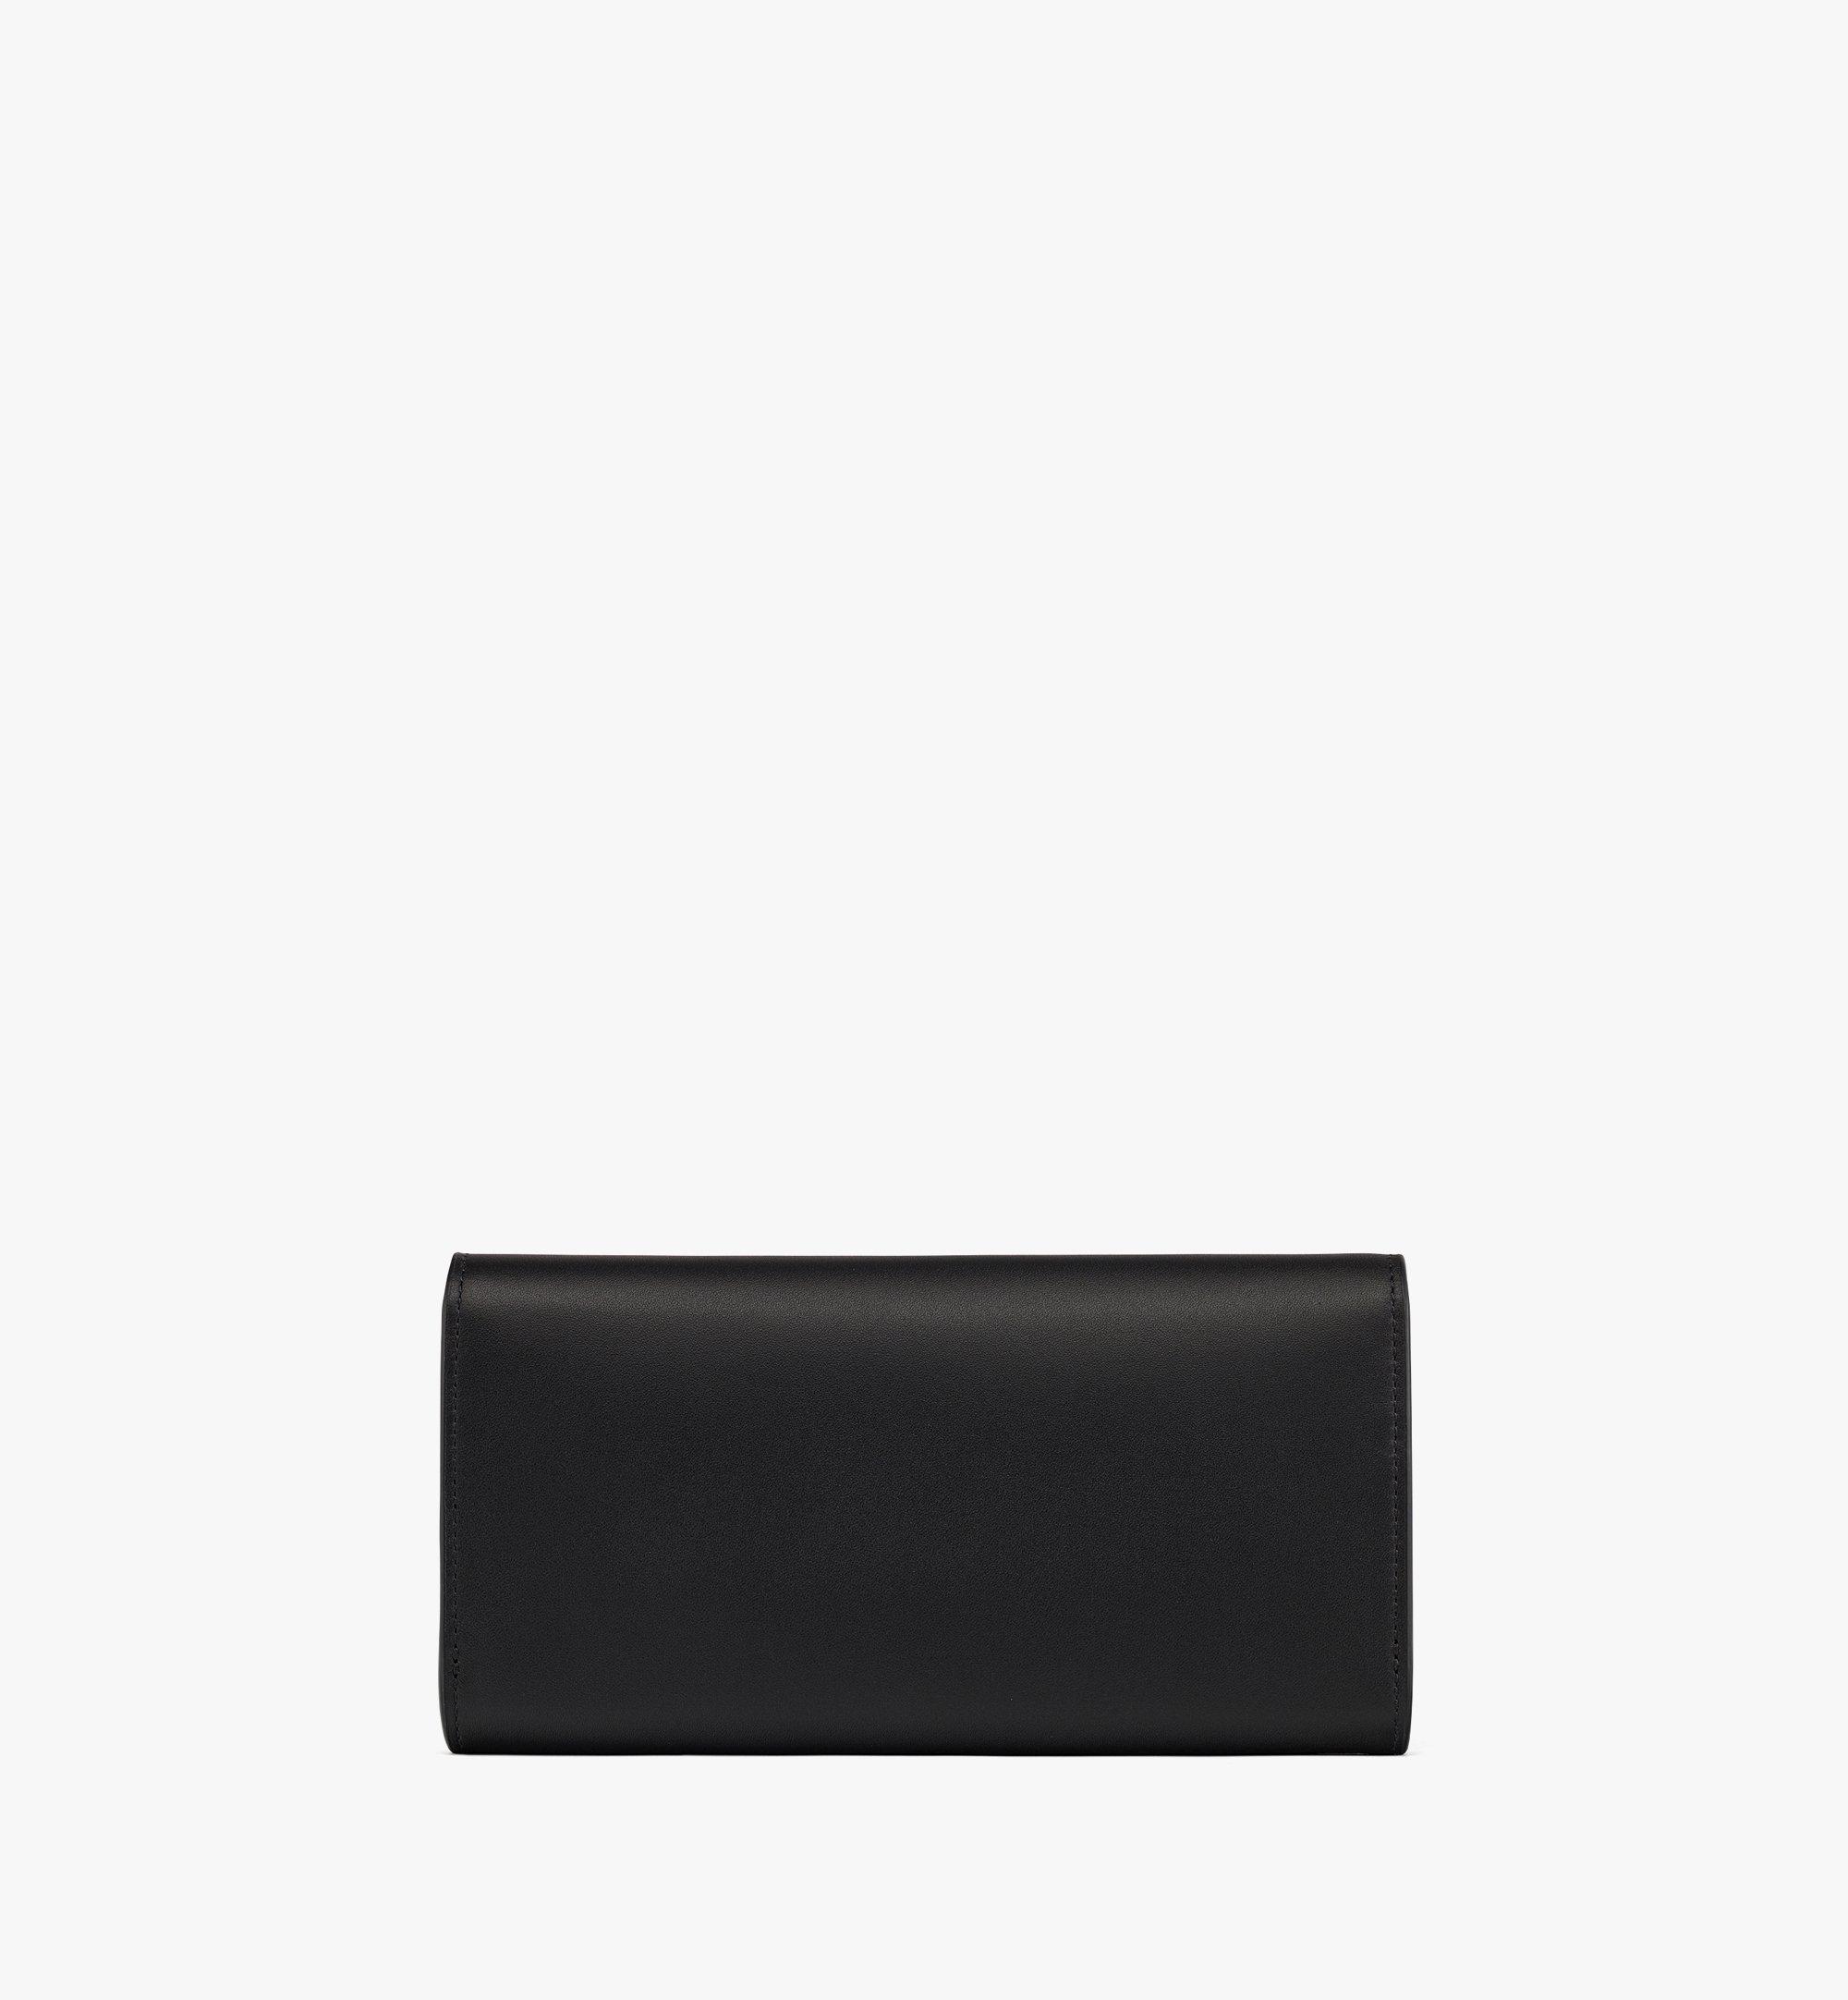 MCM Mode Travia Continental Wallet in Spanish Leather Black MYLDSLD01BK001 Alternate View 2